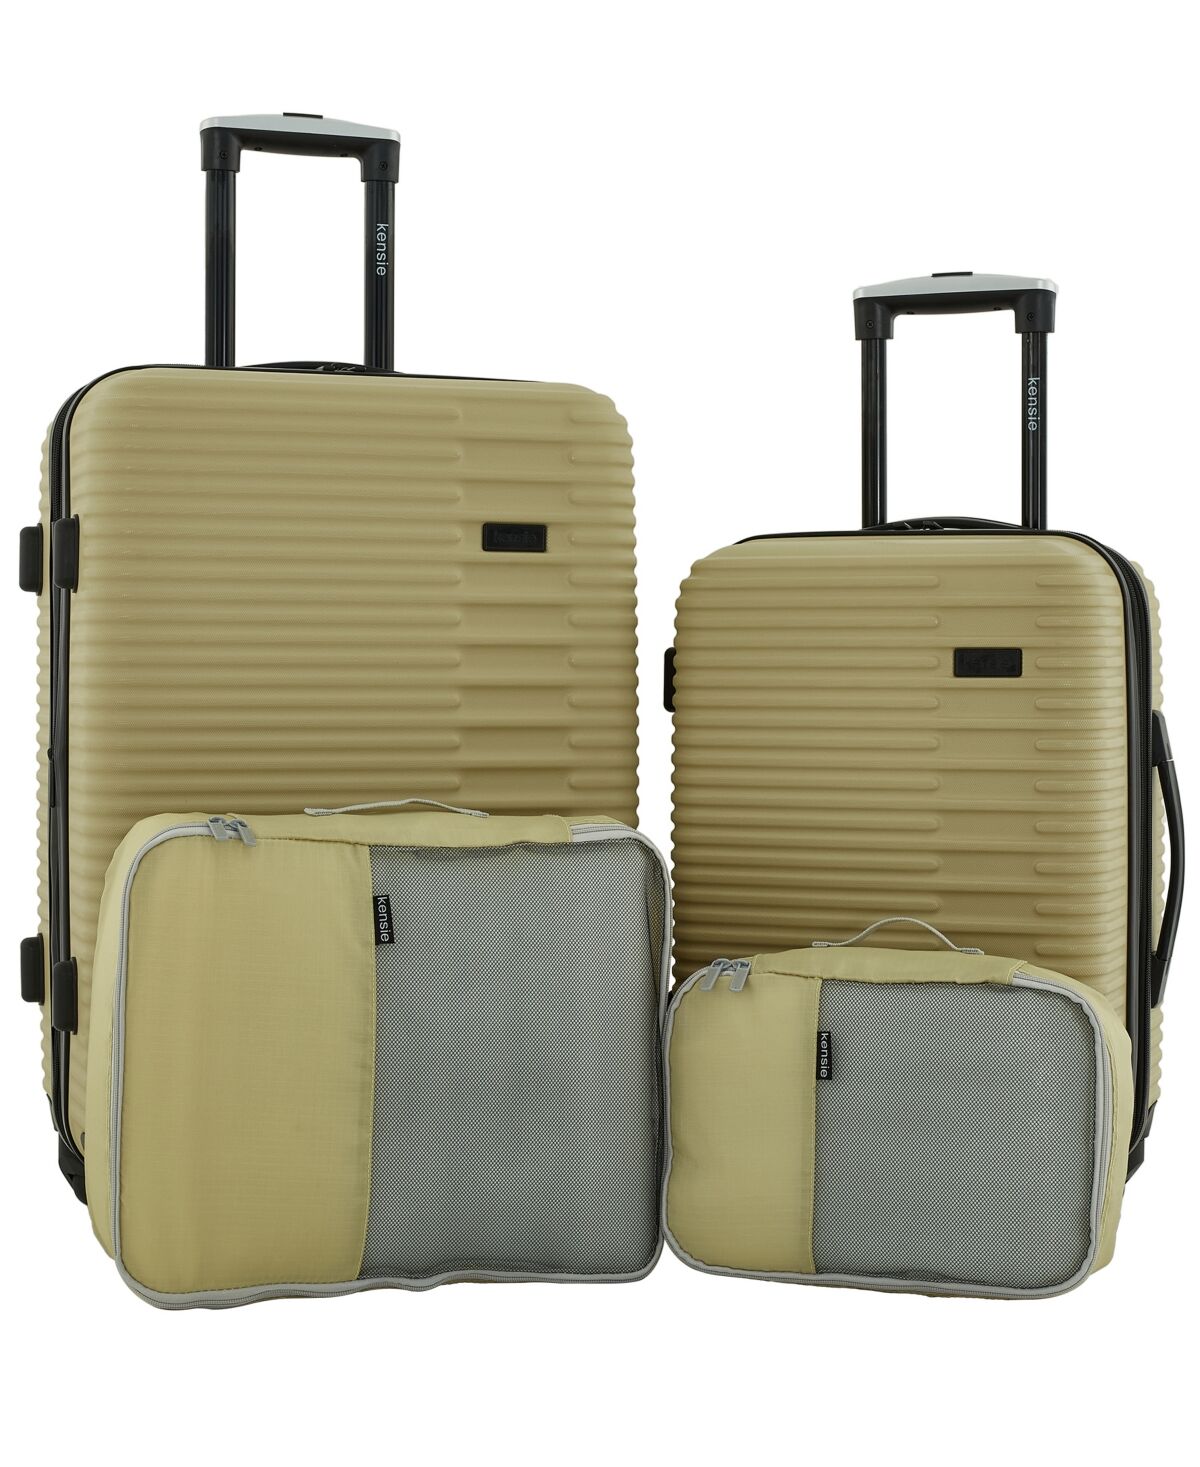 Kensie Hillsboro Expandable Rolling Hardside Collection Set, 4 Piece - Olive